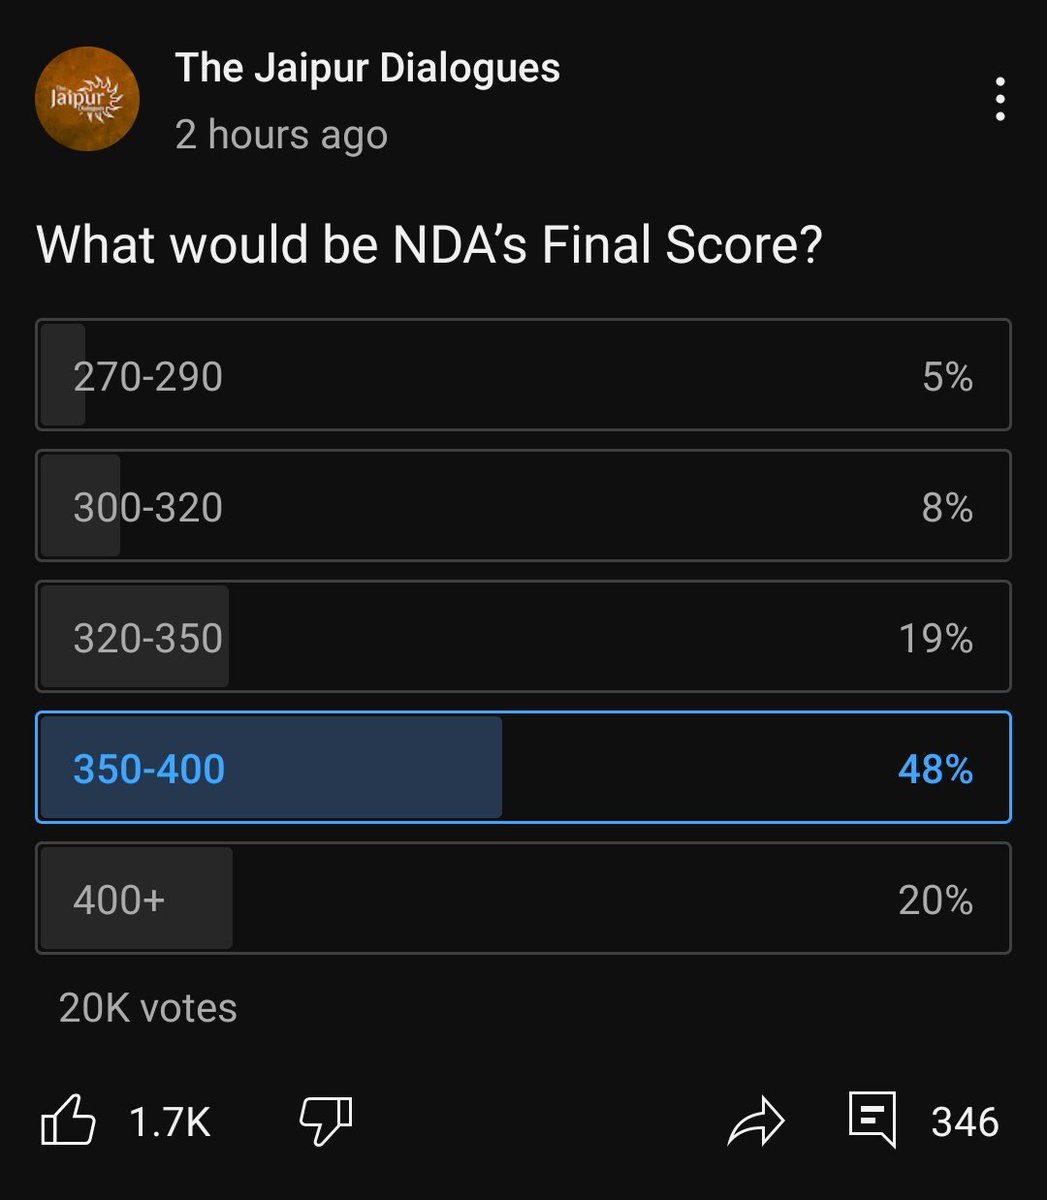 20,000 votes in 2hrs and this is what people think! What's the poll on Twitter?